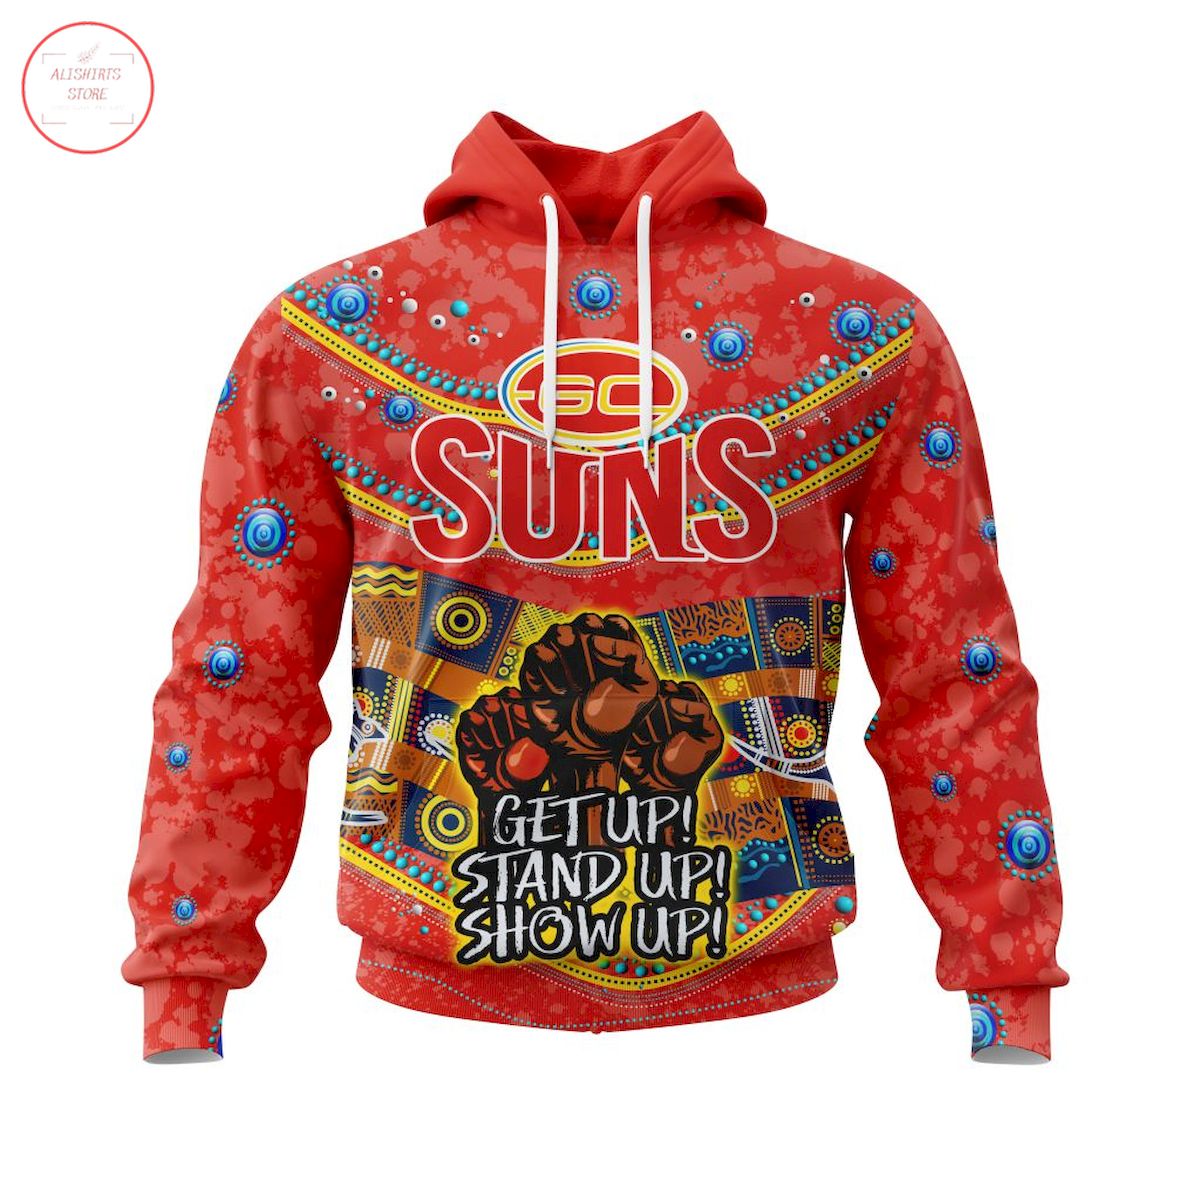 AFL Gold Coast Suns Customized All Over Printed Shirts